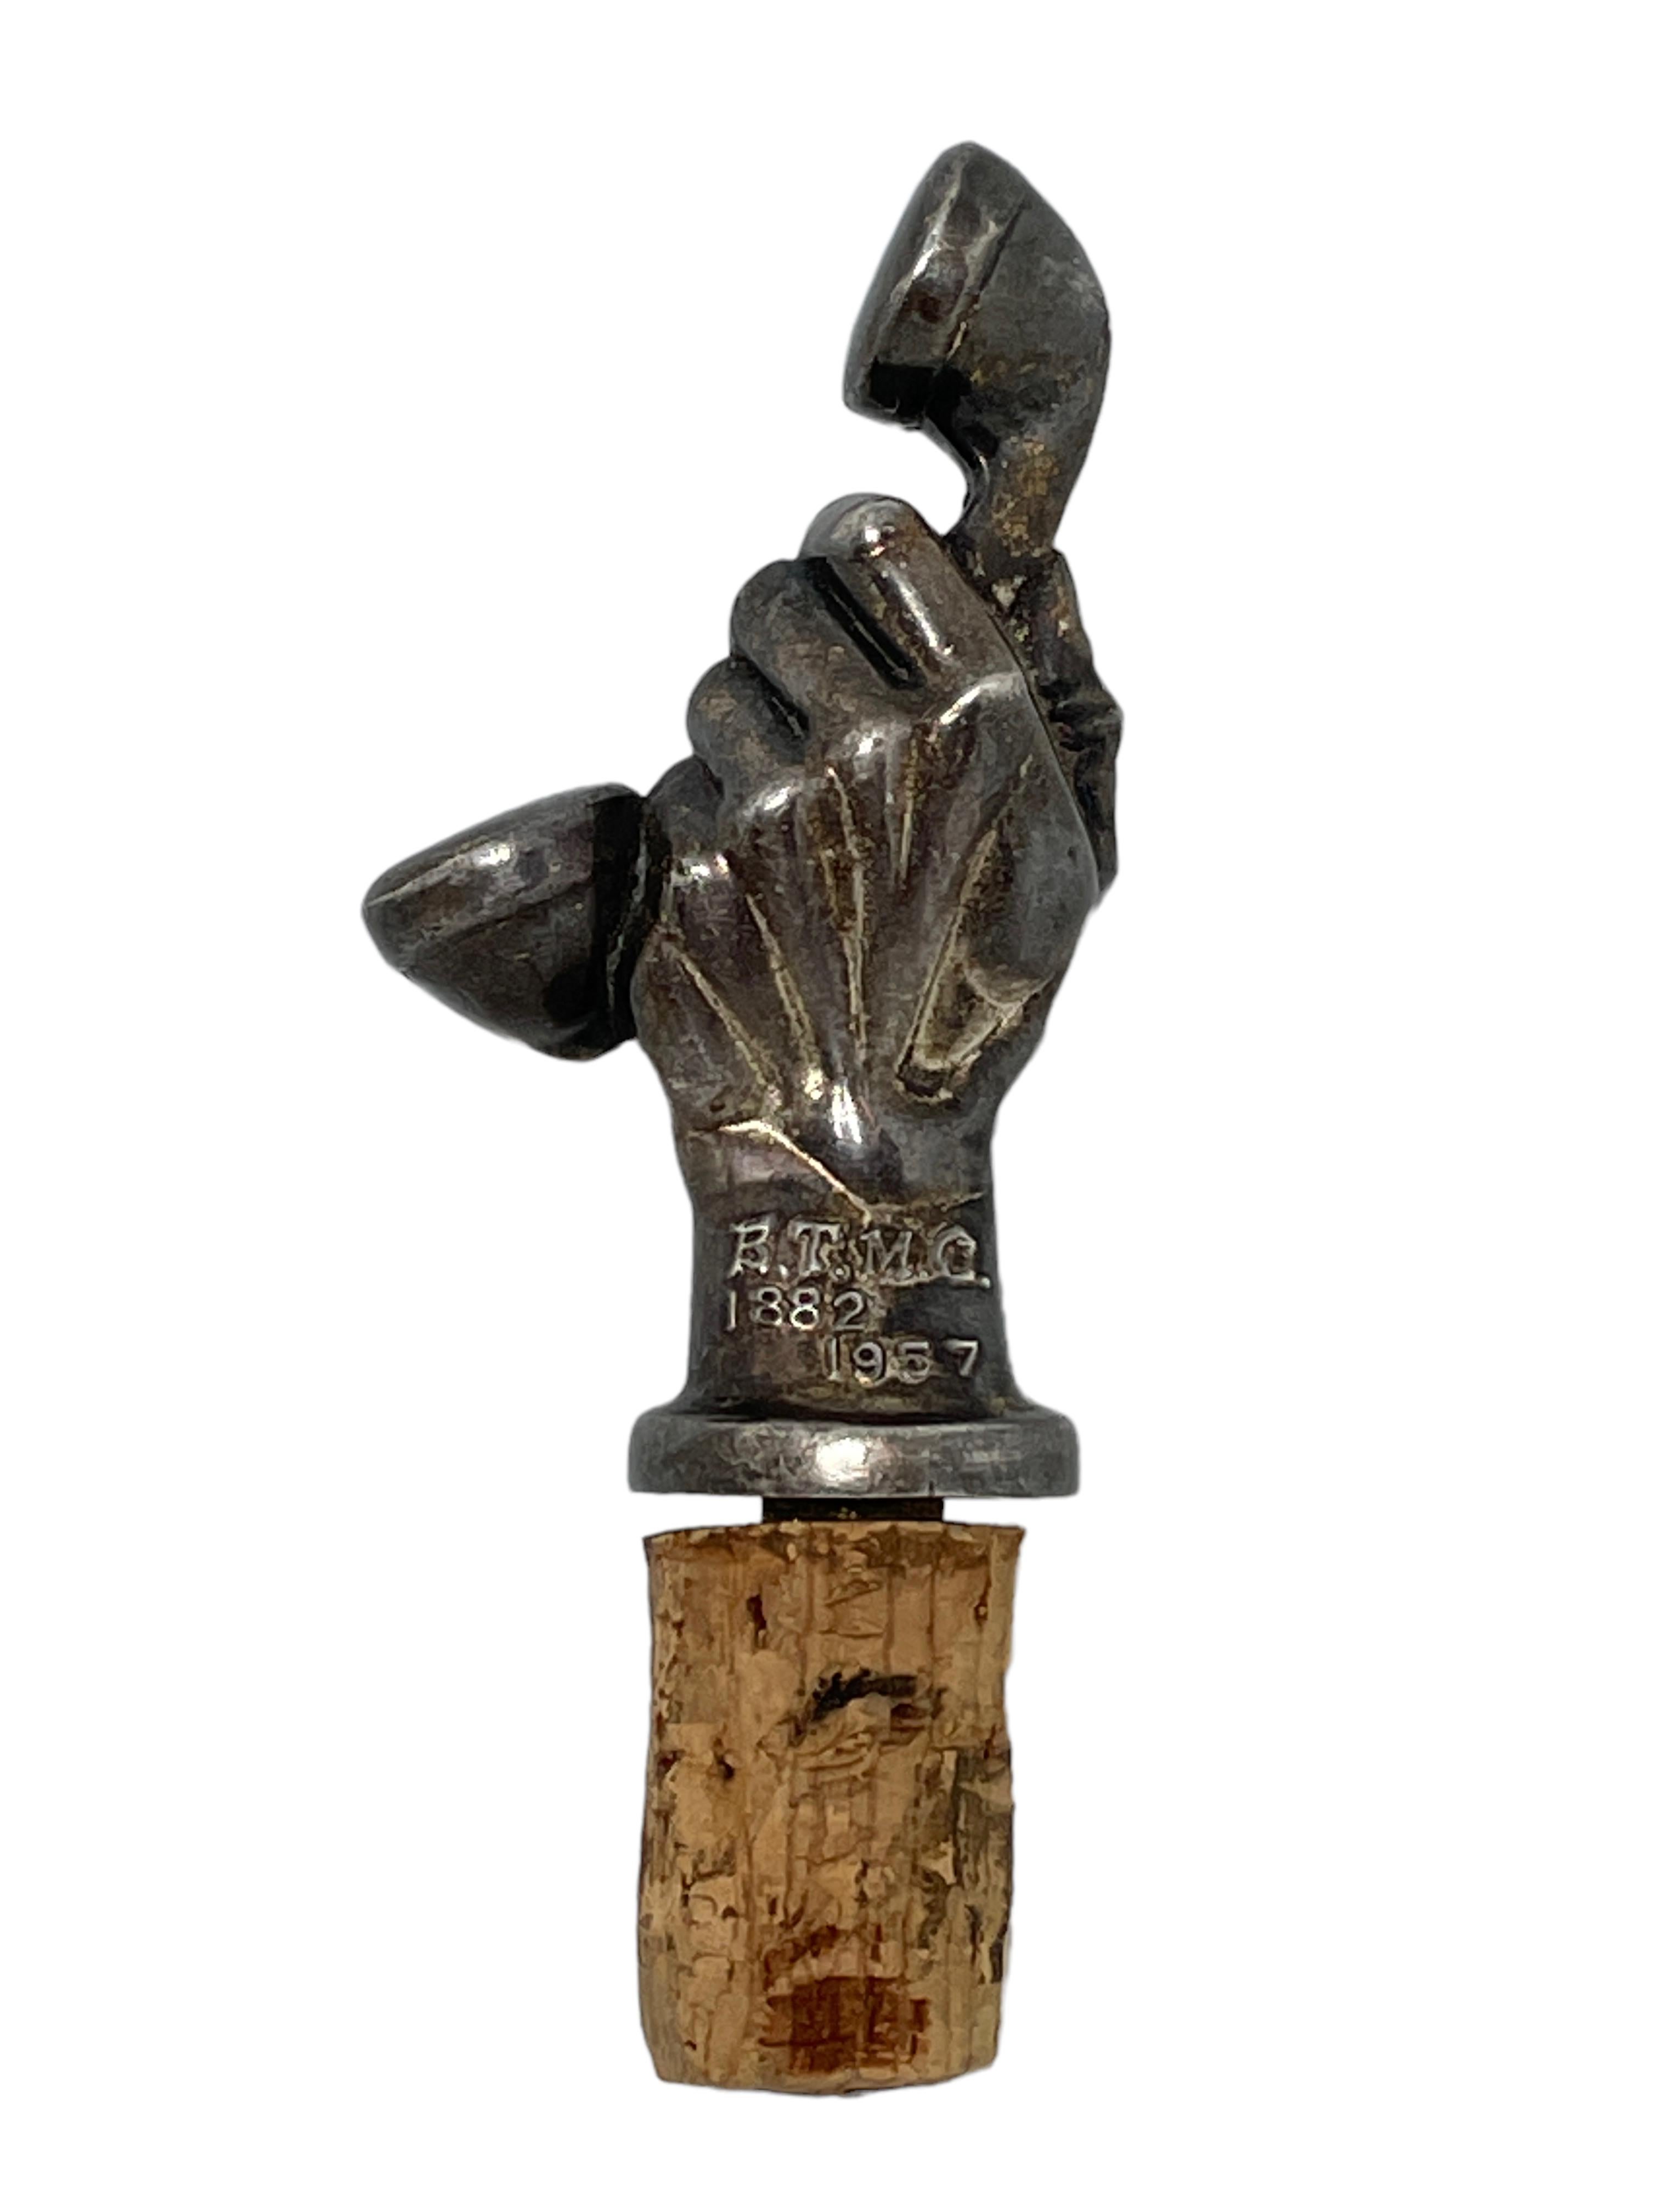 A beautiful metal and cork bottle stopper. Some wear with a nice patina, but this is old-age. Made of metal and cork. A beautiful nice barware item or just a display item in your collections of antique bottle stoppers. Found at an estate sale in